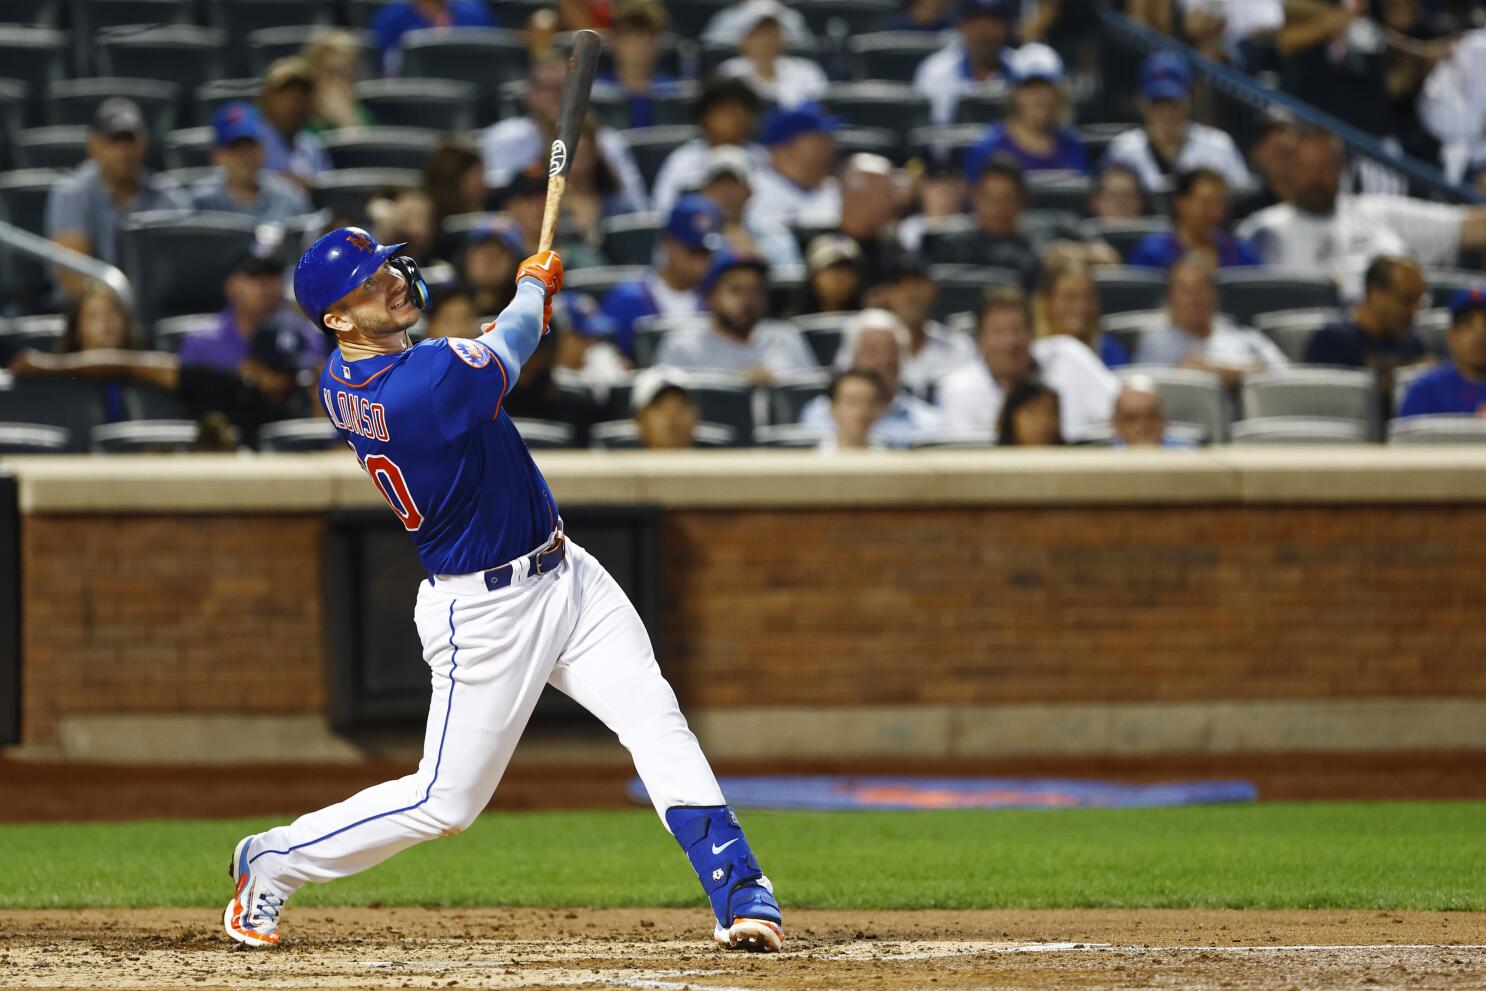 Video: Cubs rookie hits home run in first MLB at-bat